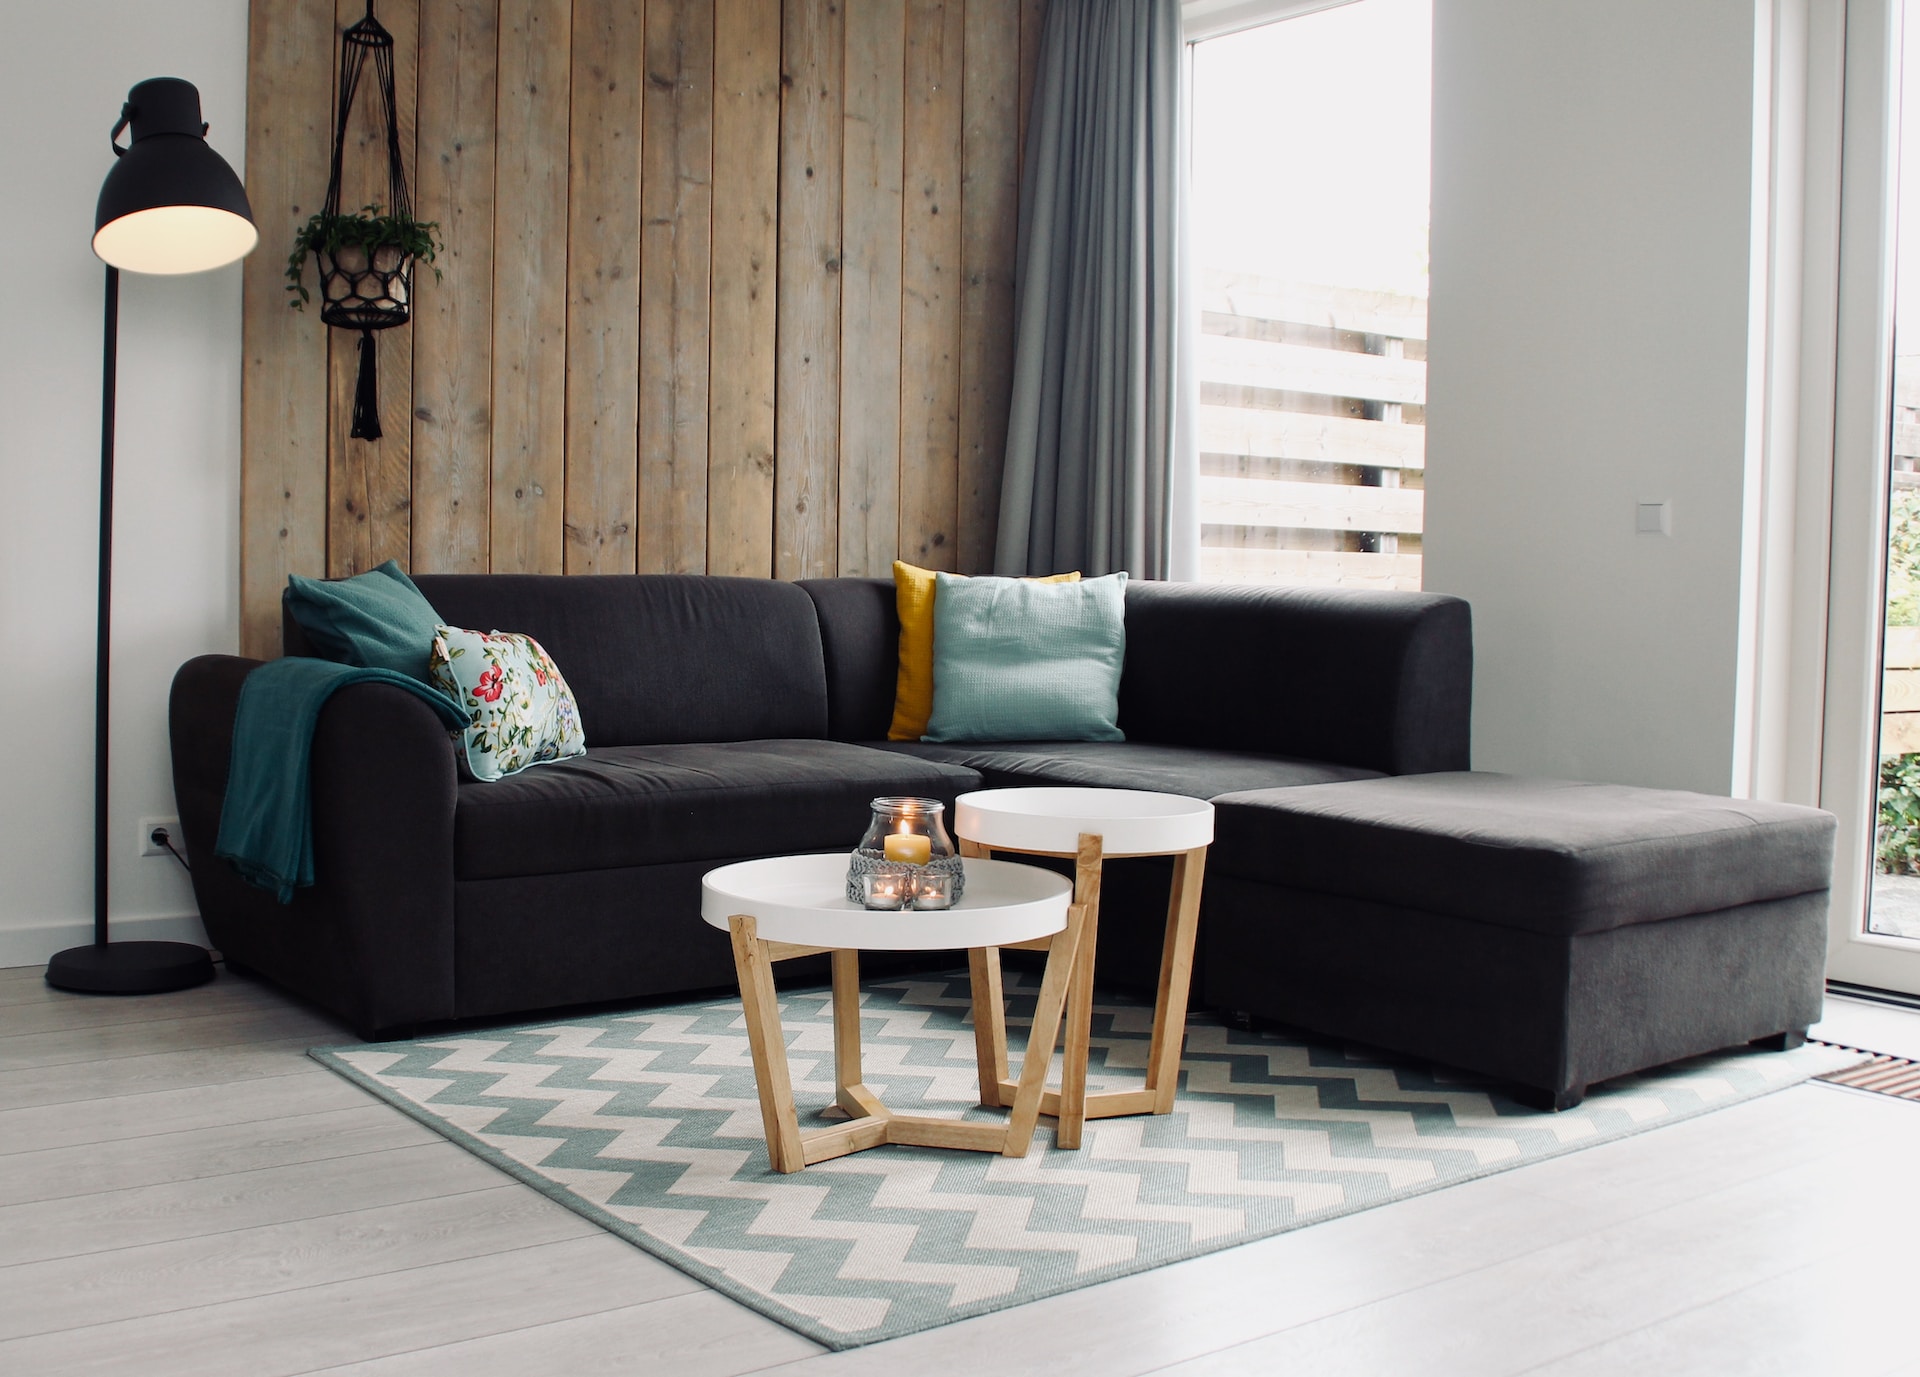 Black sofa with colourful cushions, a tall lamp, a wooden wall, and two coffee tables